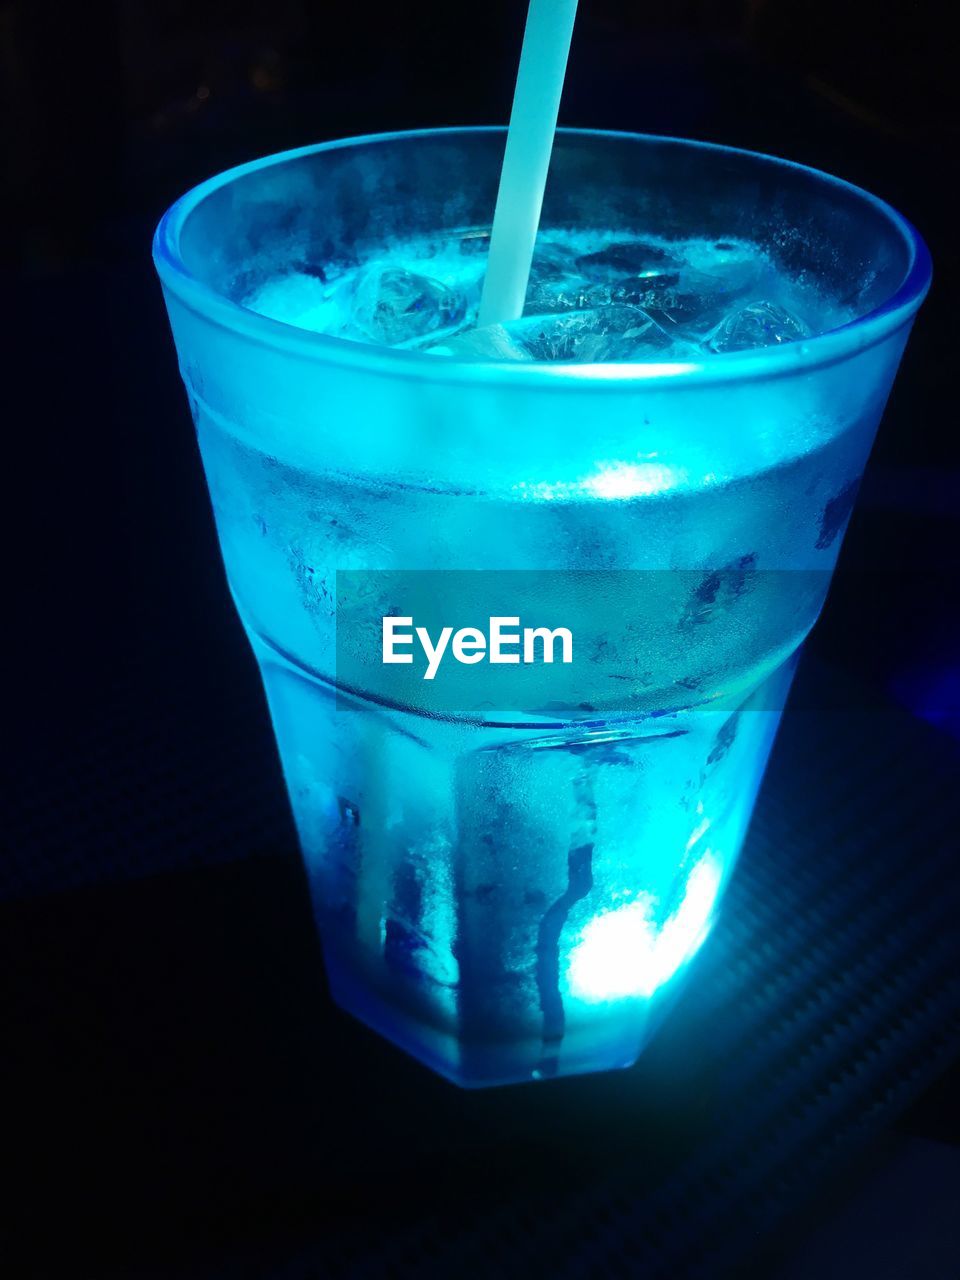 CLOSE-UP OF DRINK IN BLUE WATER